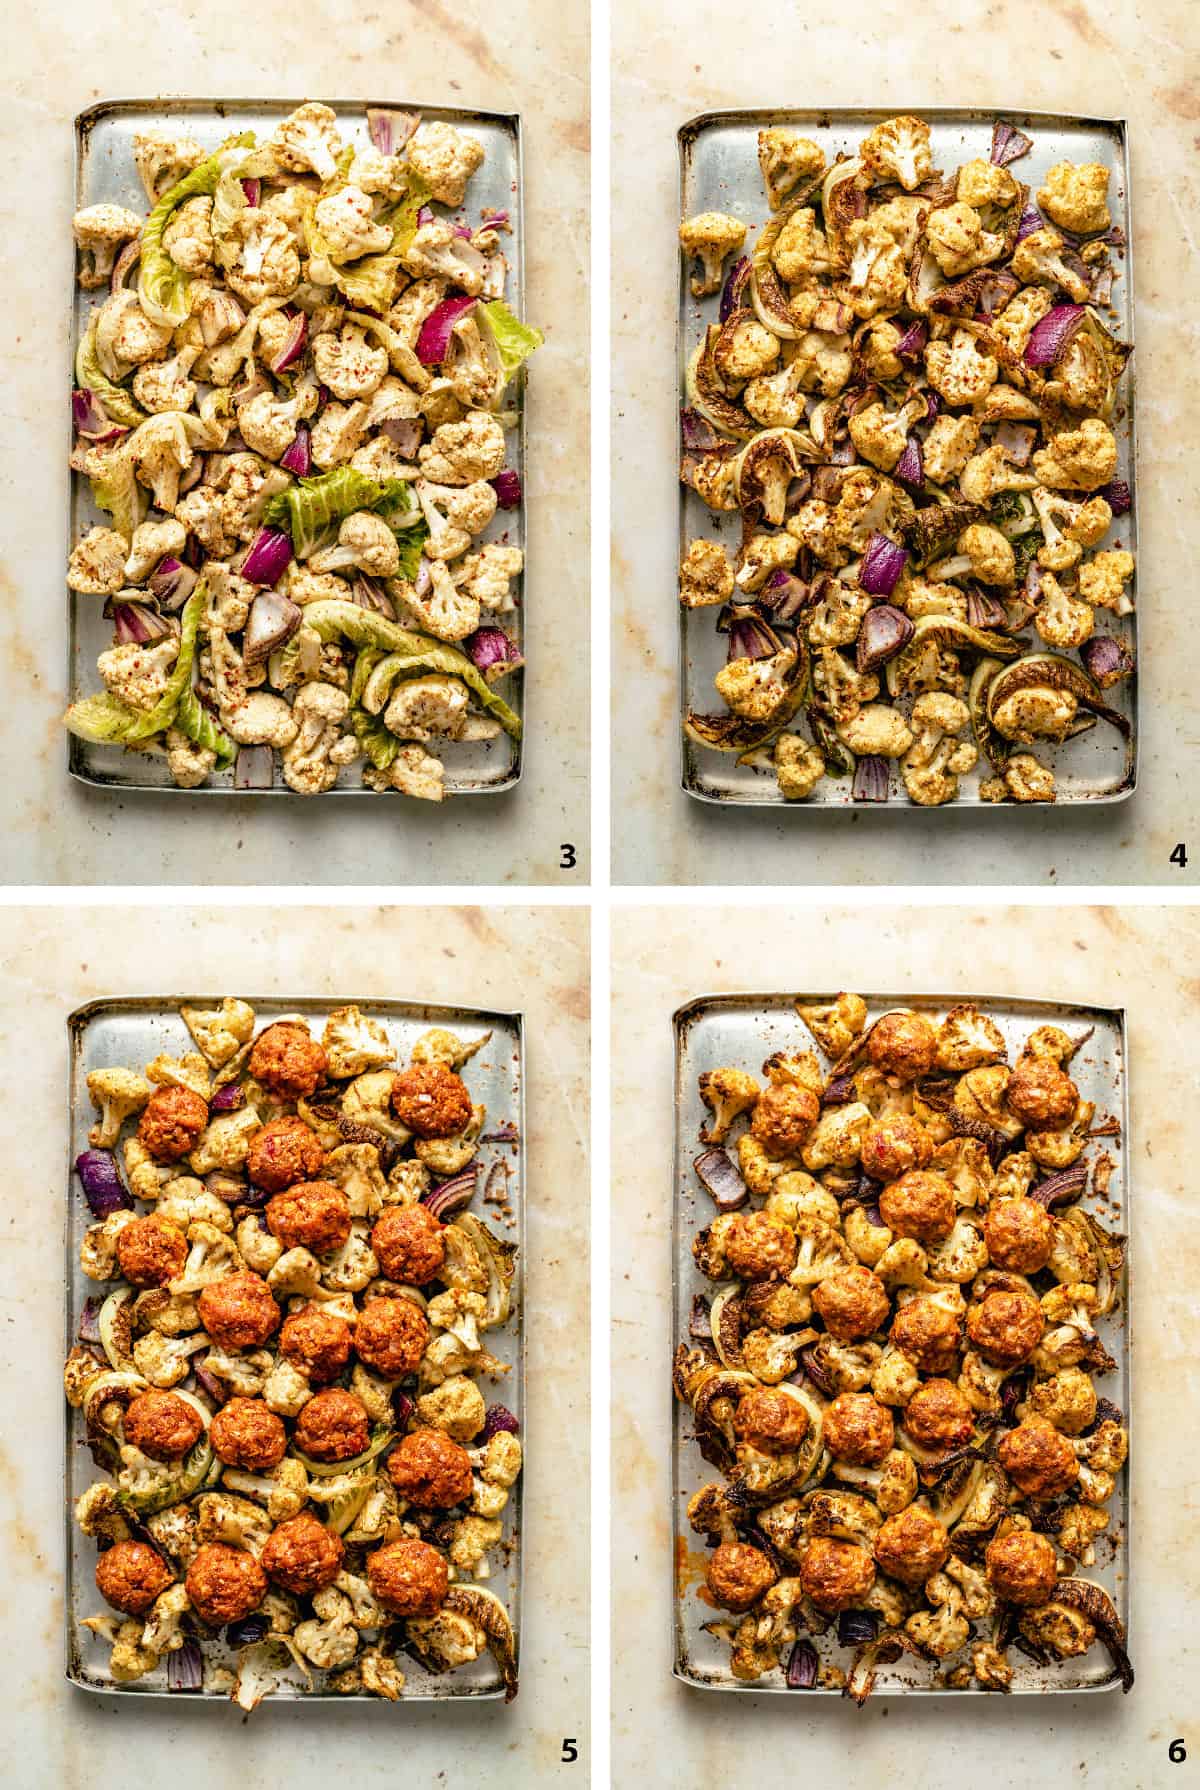 Process steps of spices on cauliflower, baked cauliflower, meatballs pre and post baked on baking sheet. 